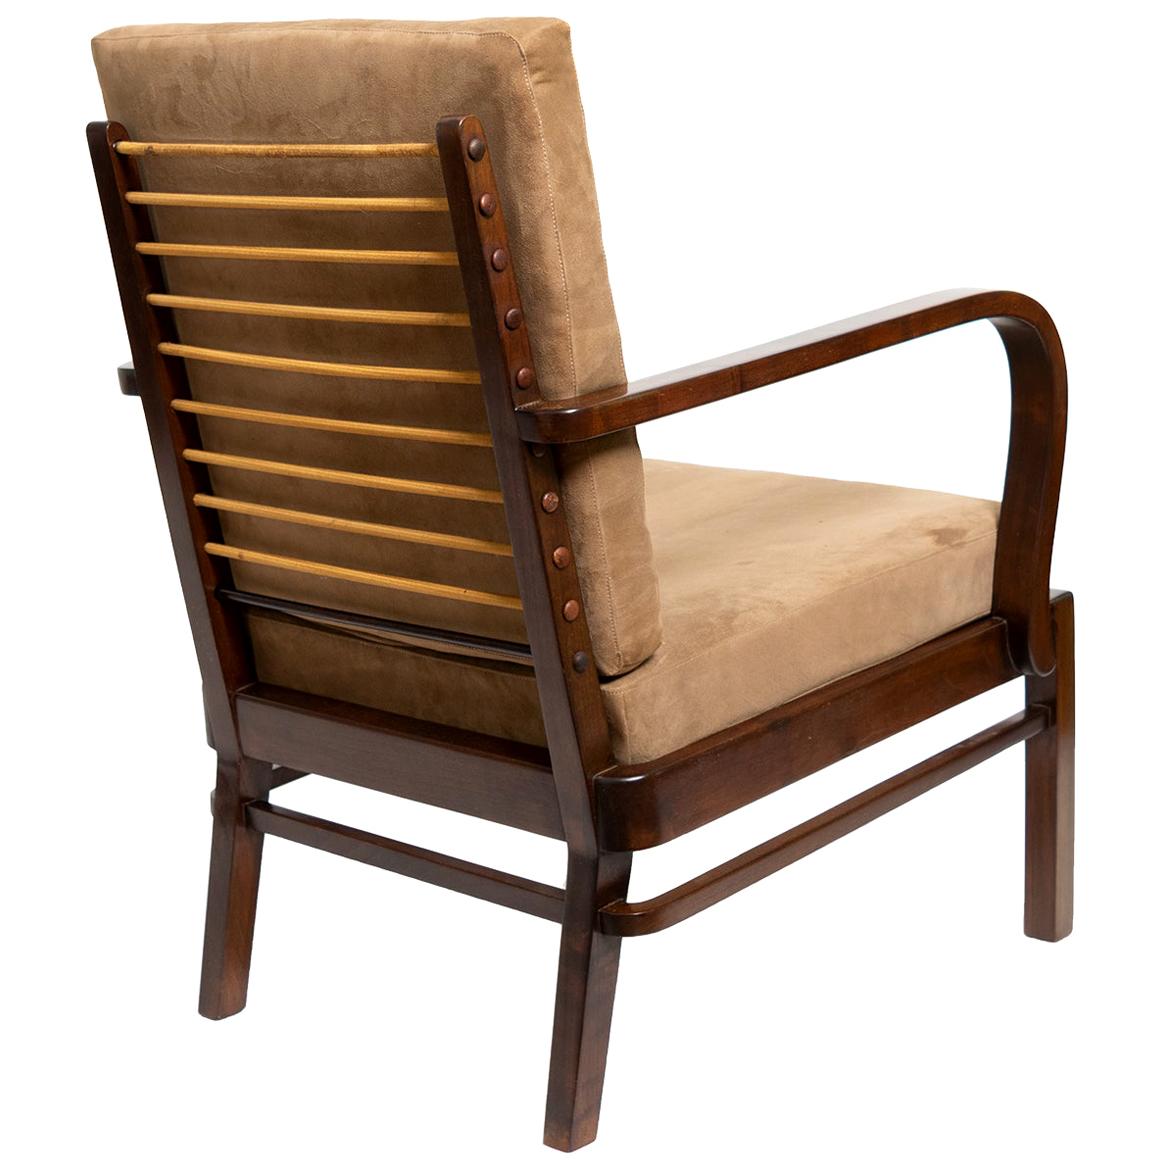 Modernist 1920s Lounge Chair Designed by Wilhelm Knoll for Knoll Antimott